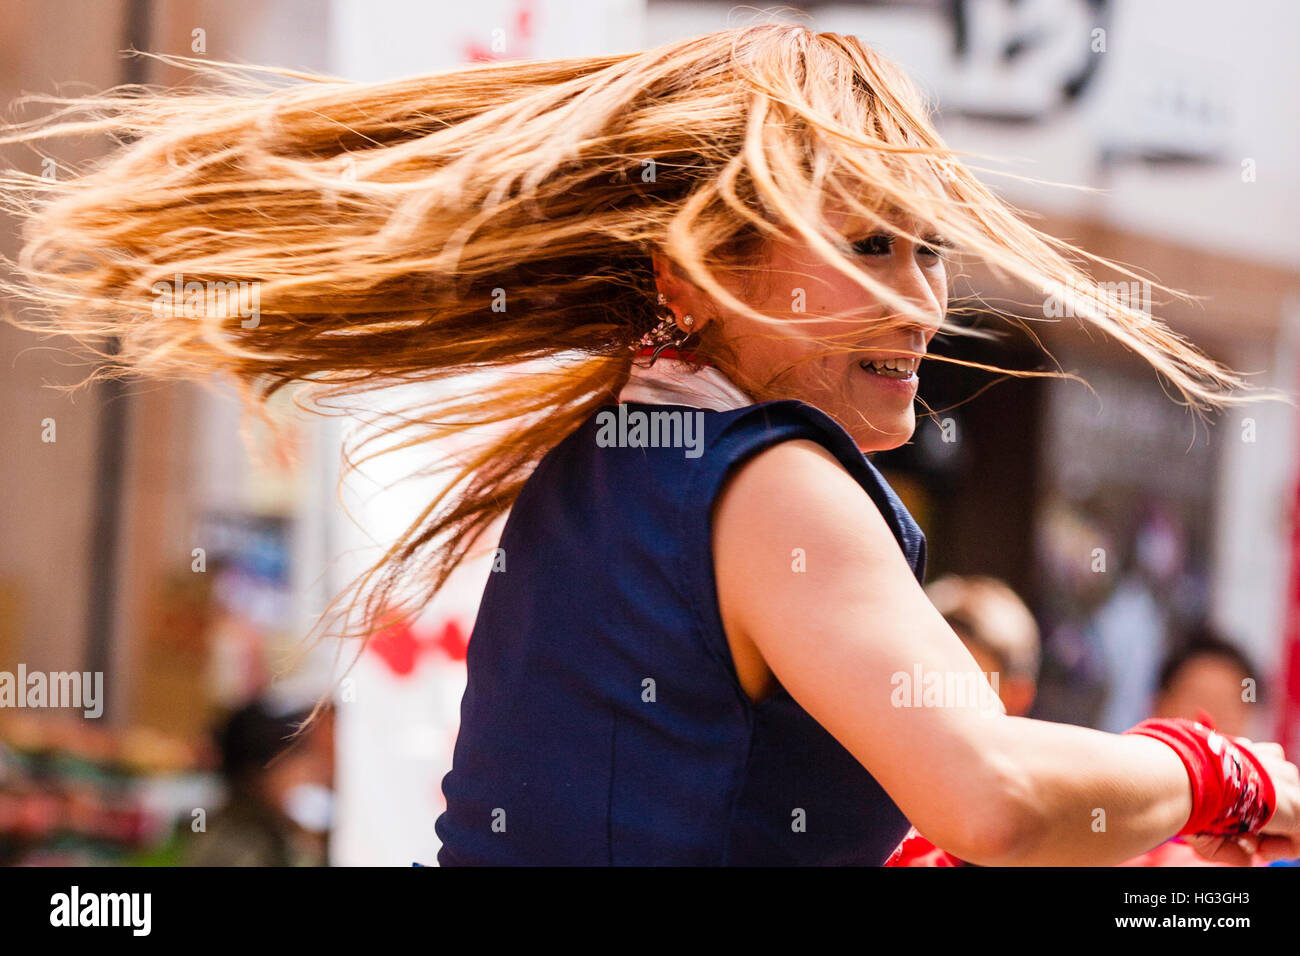 Yosakoi festival. Japanese women dancer with dyed red hair, dancing in city shopping arcade, swirling with her hair flying, blurred motion Stock Photo